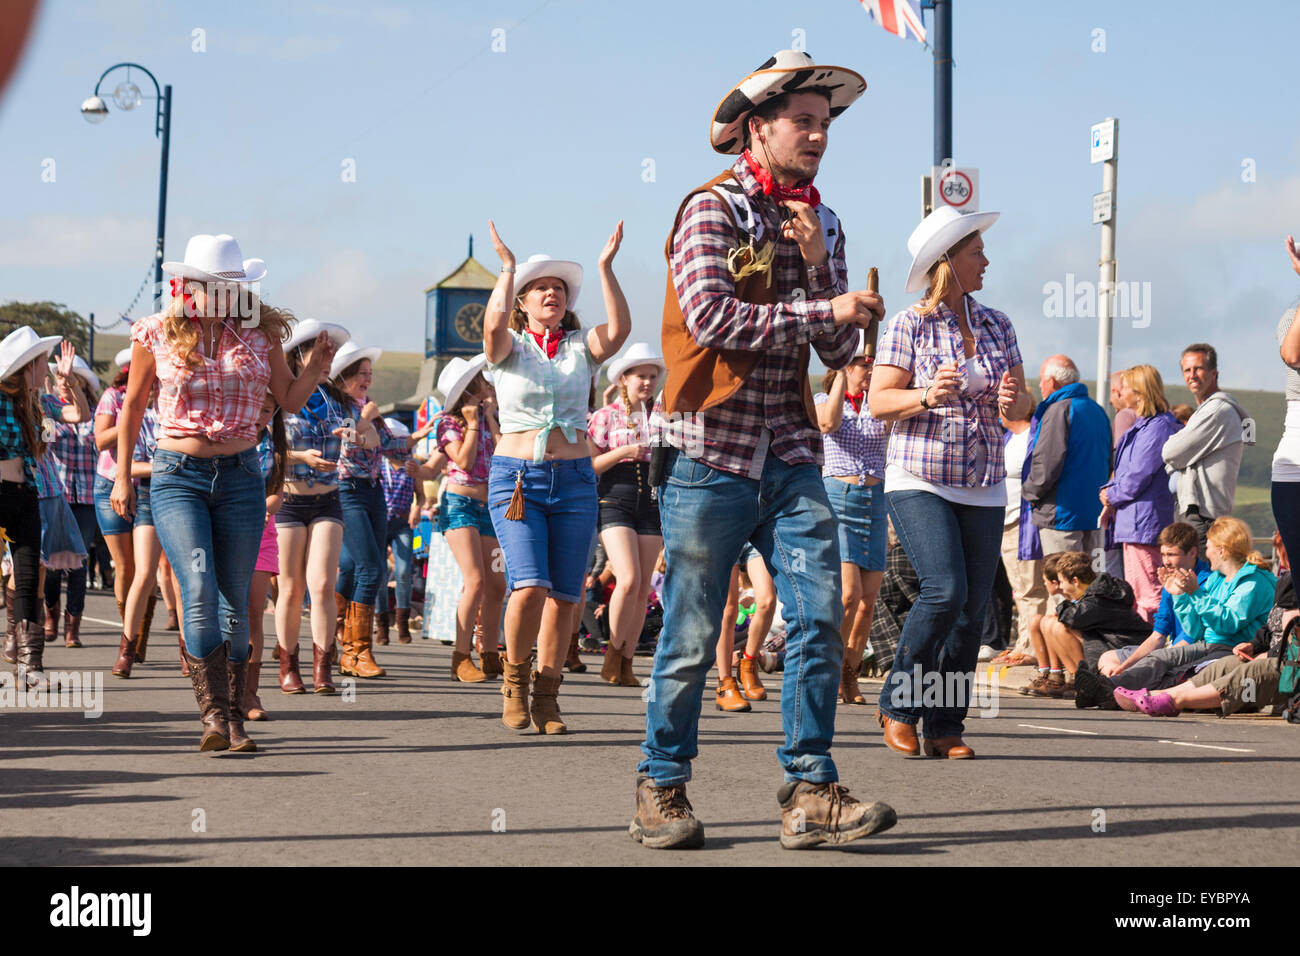 Swanage, Dorset UK 26 July 2015. Swanage Carnival Procession in July with the theme of Superheroes - cowgirl line dancer  Credit:  Carolyn Jenkins/Alamy Live News Stock Photo